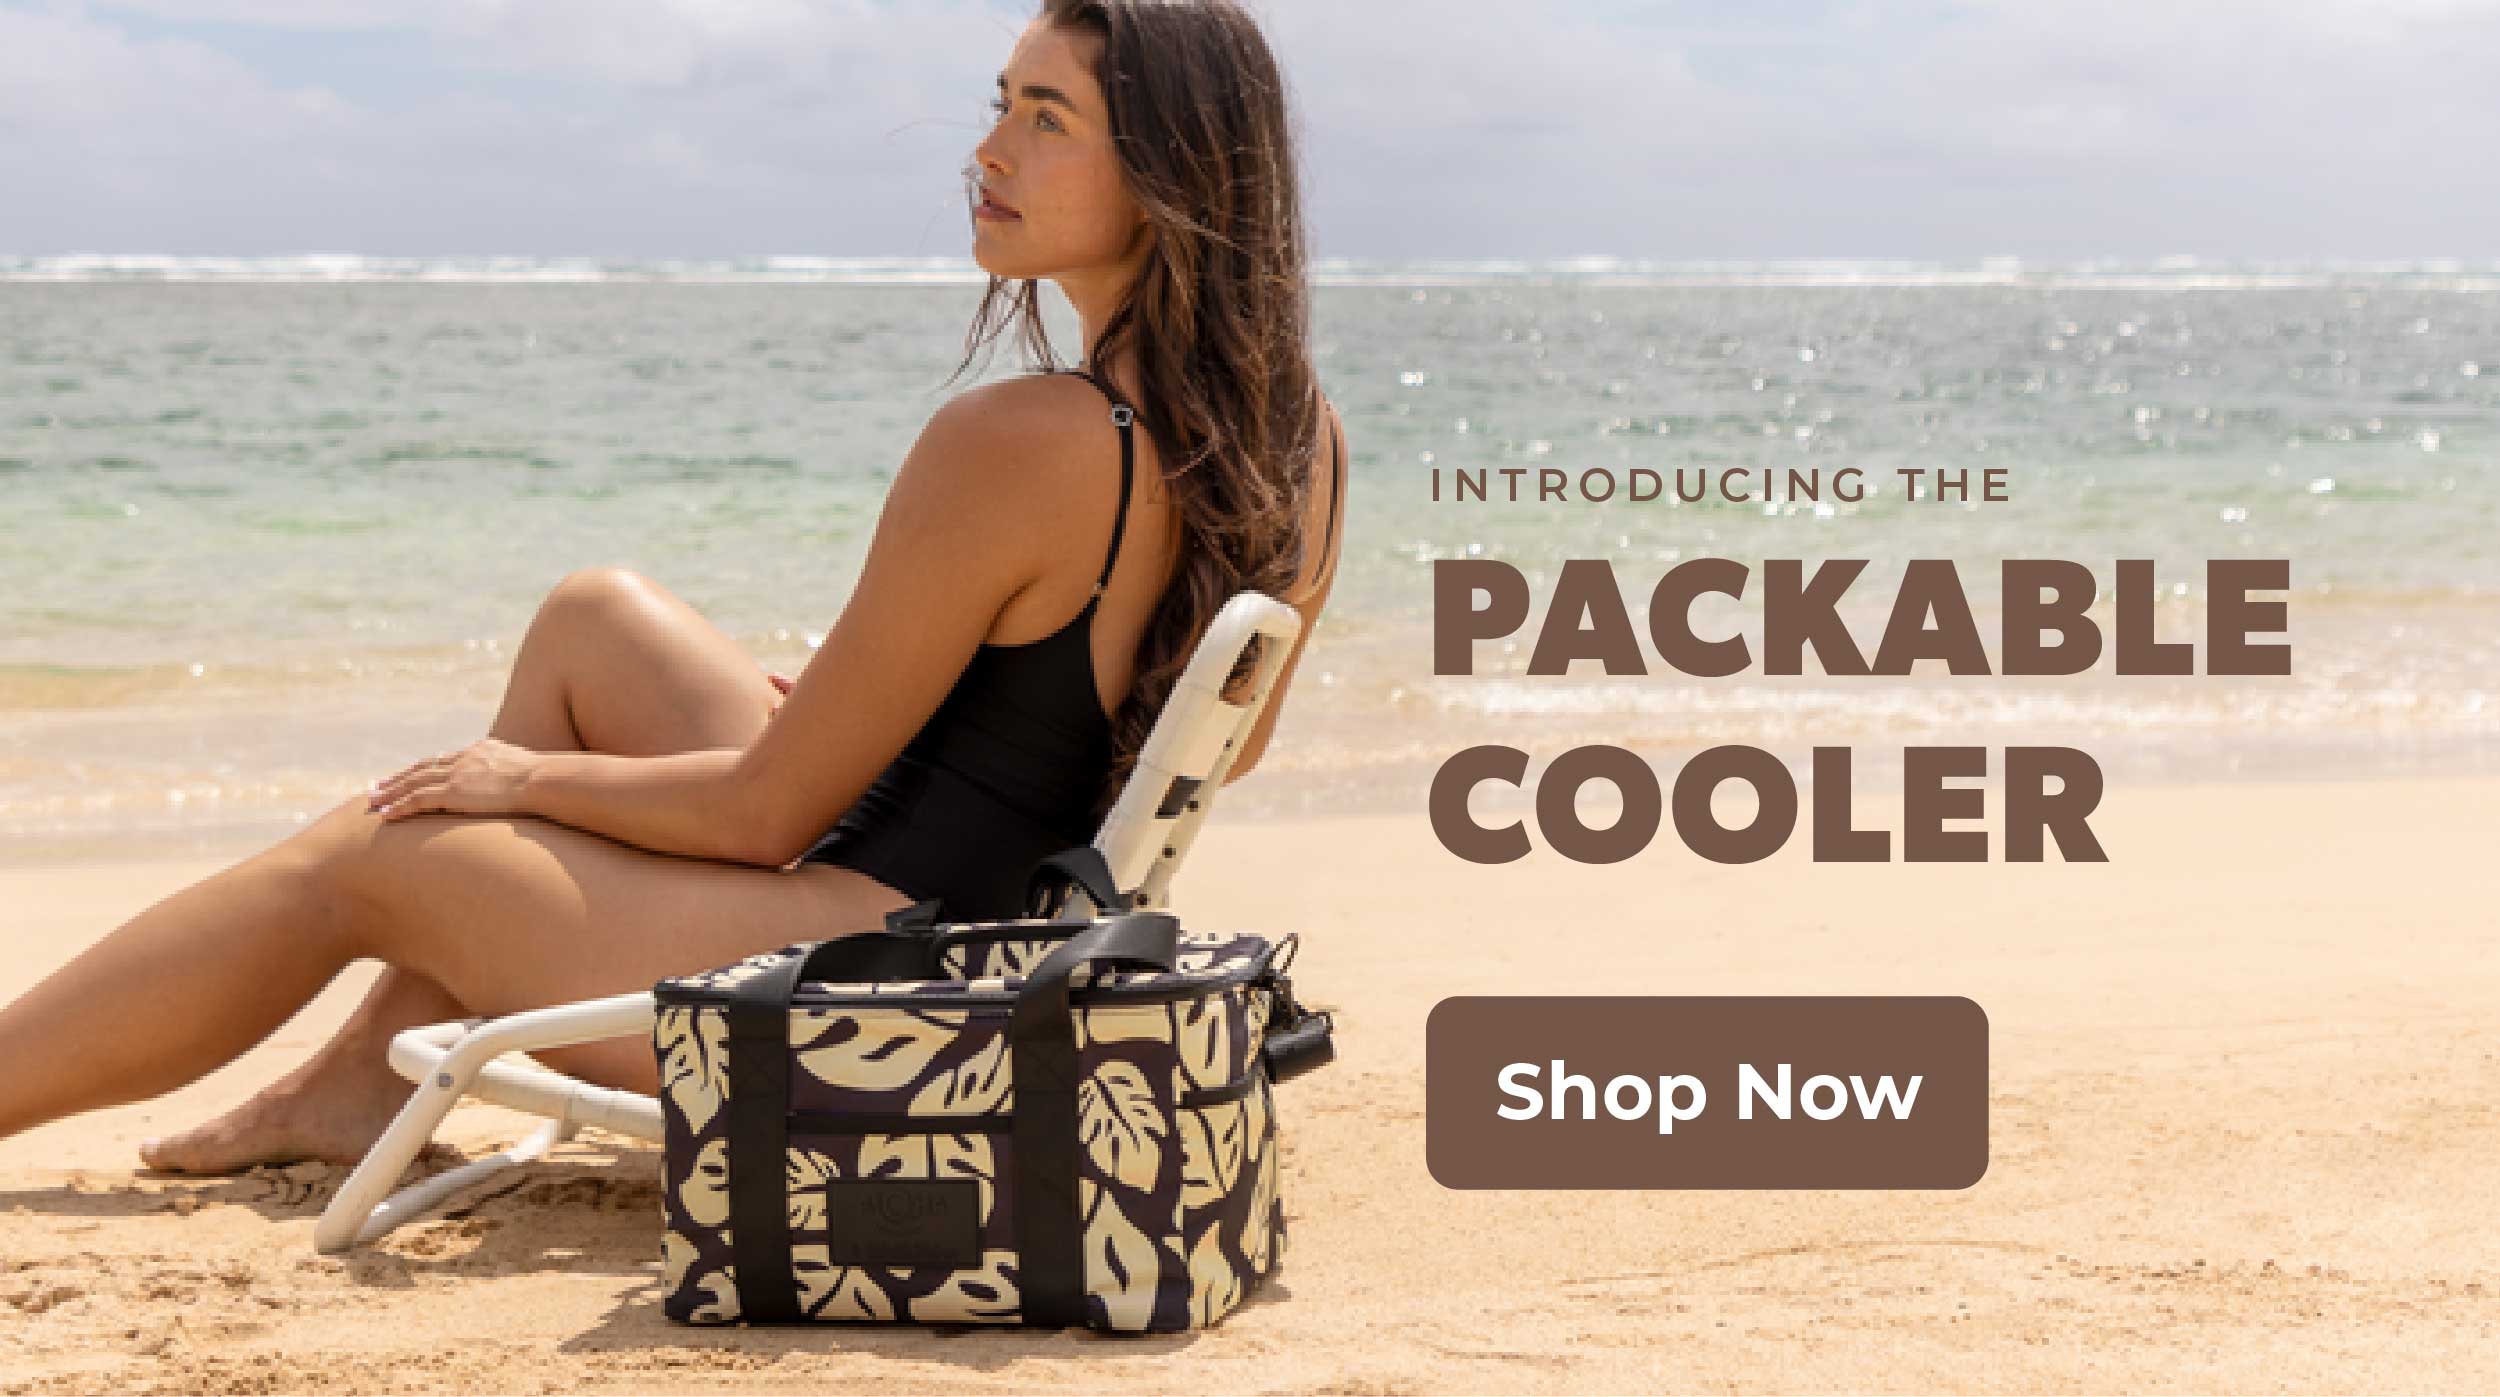 Introducing the Packable Cooler, Shop Now